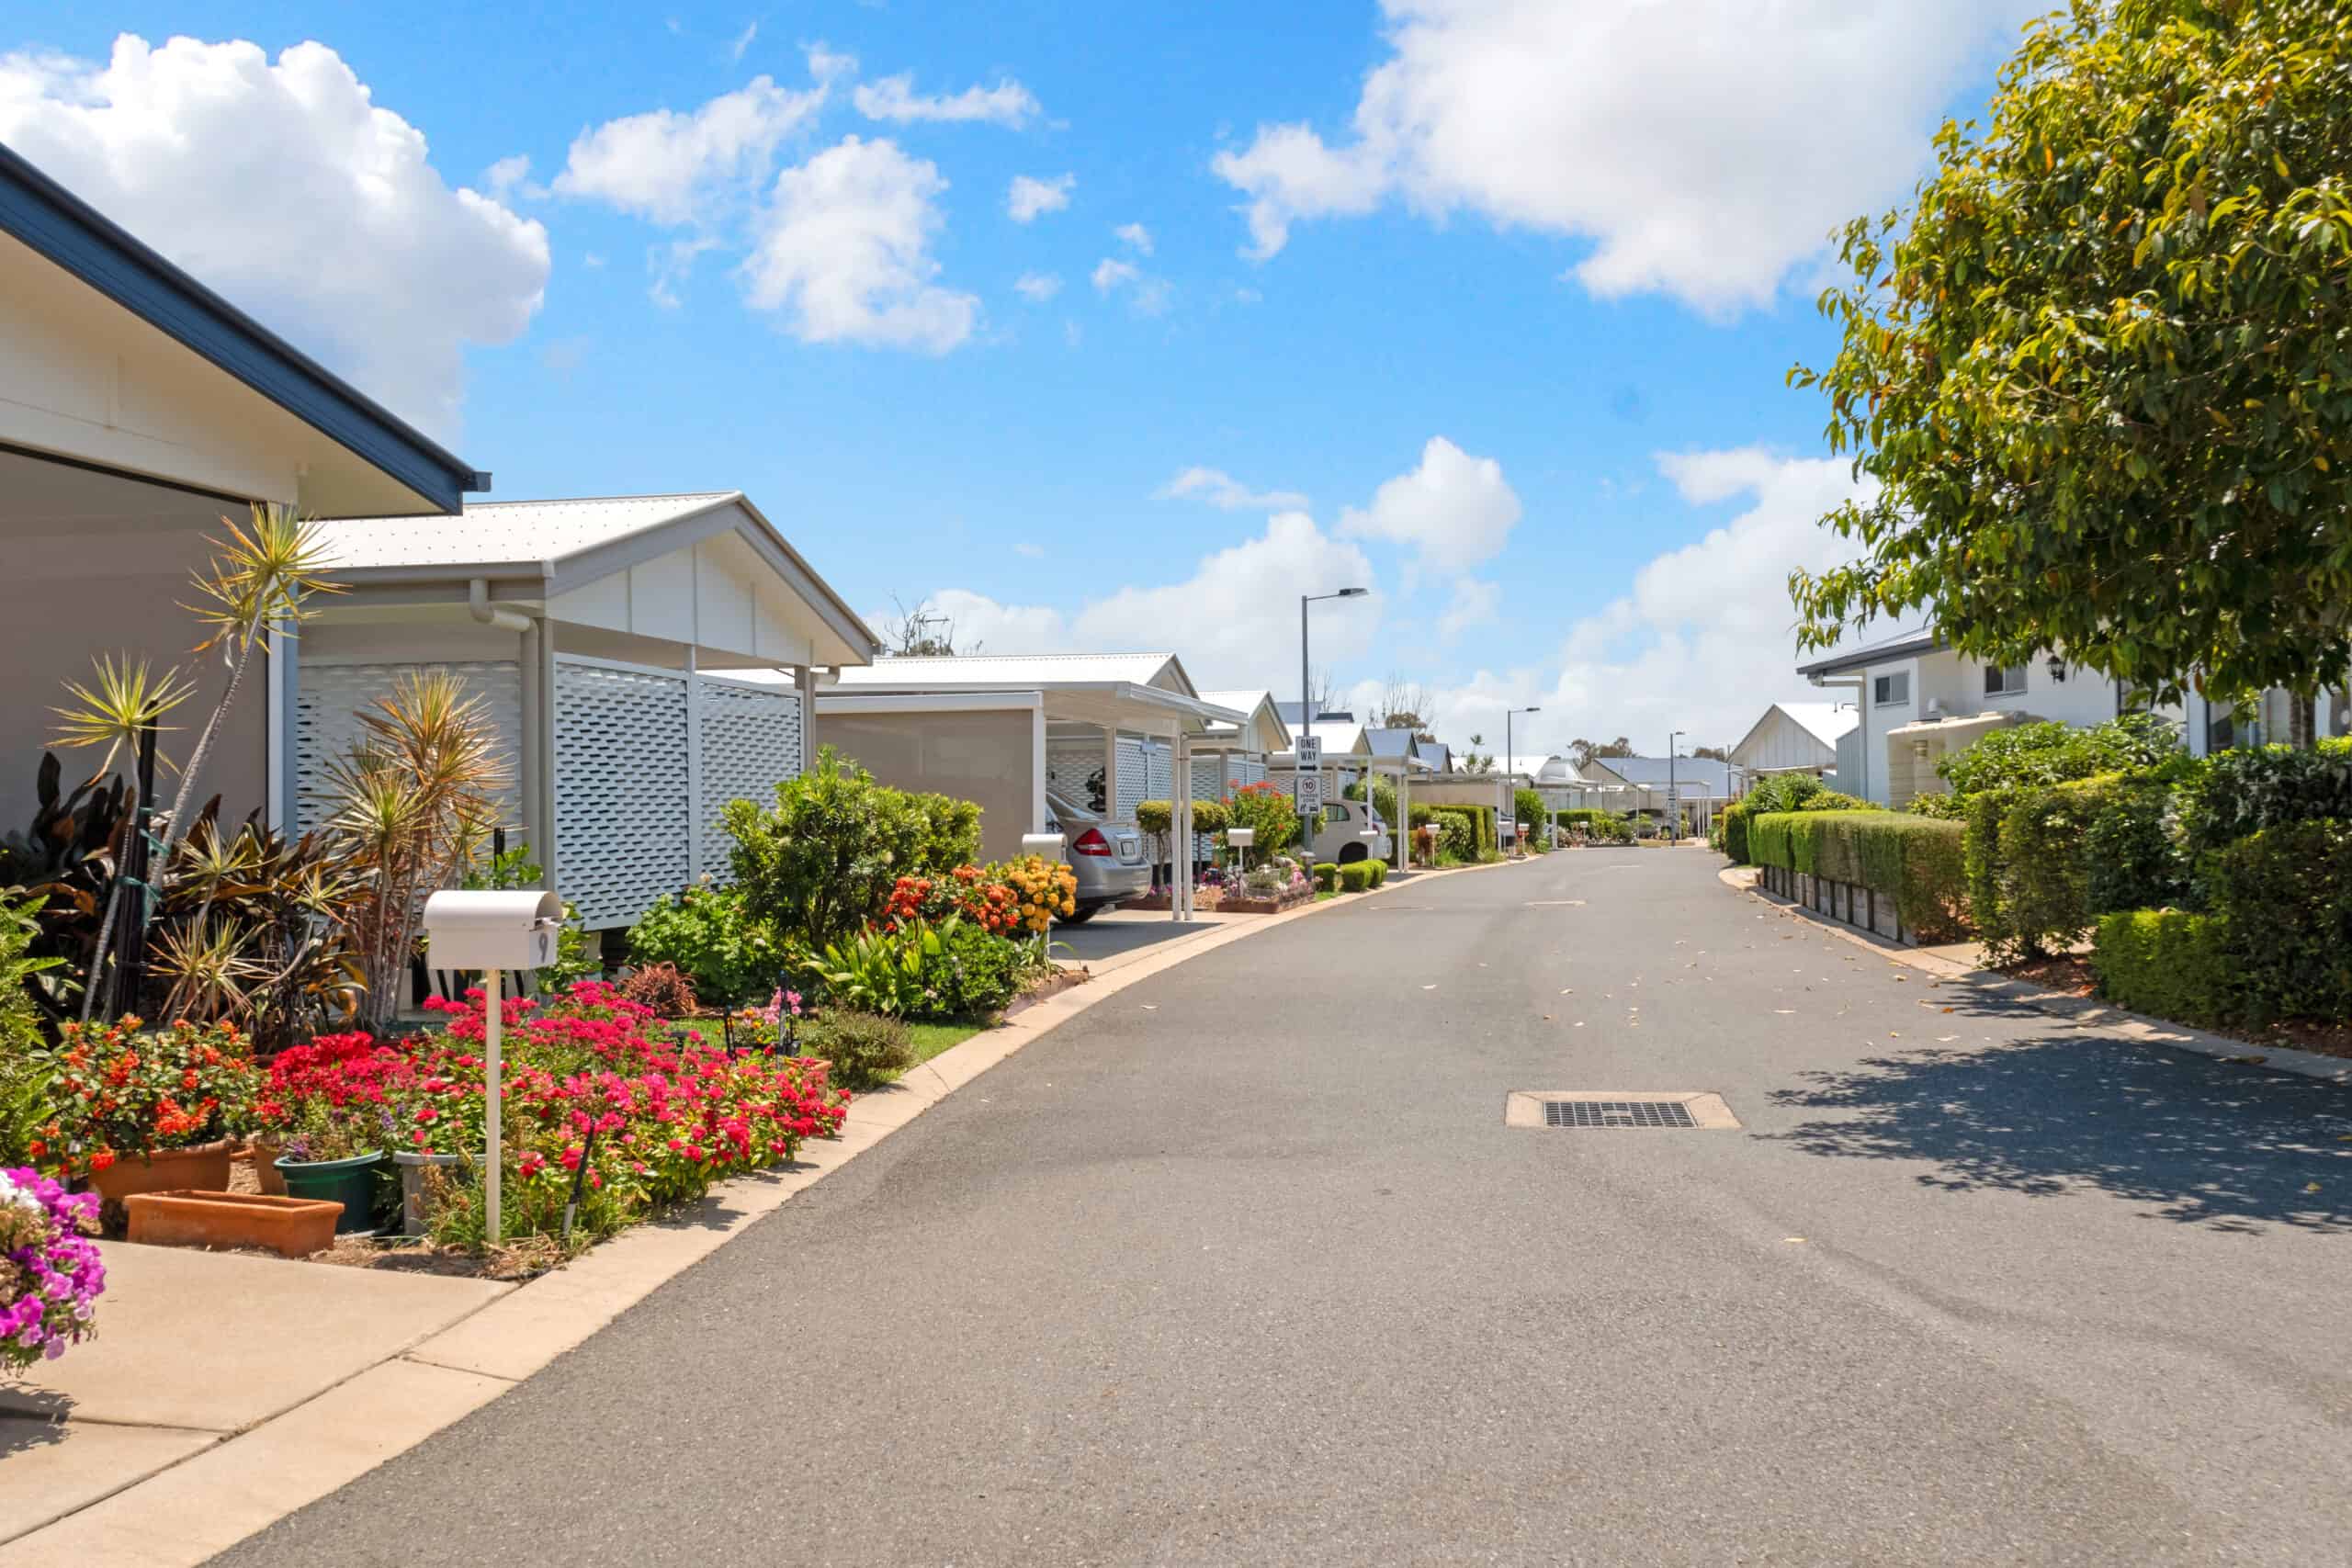 Street Lined with homes and beautiful flowers at Oak Tree Village Yeppoon Barmaryee Road